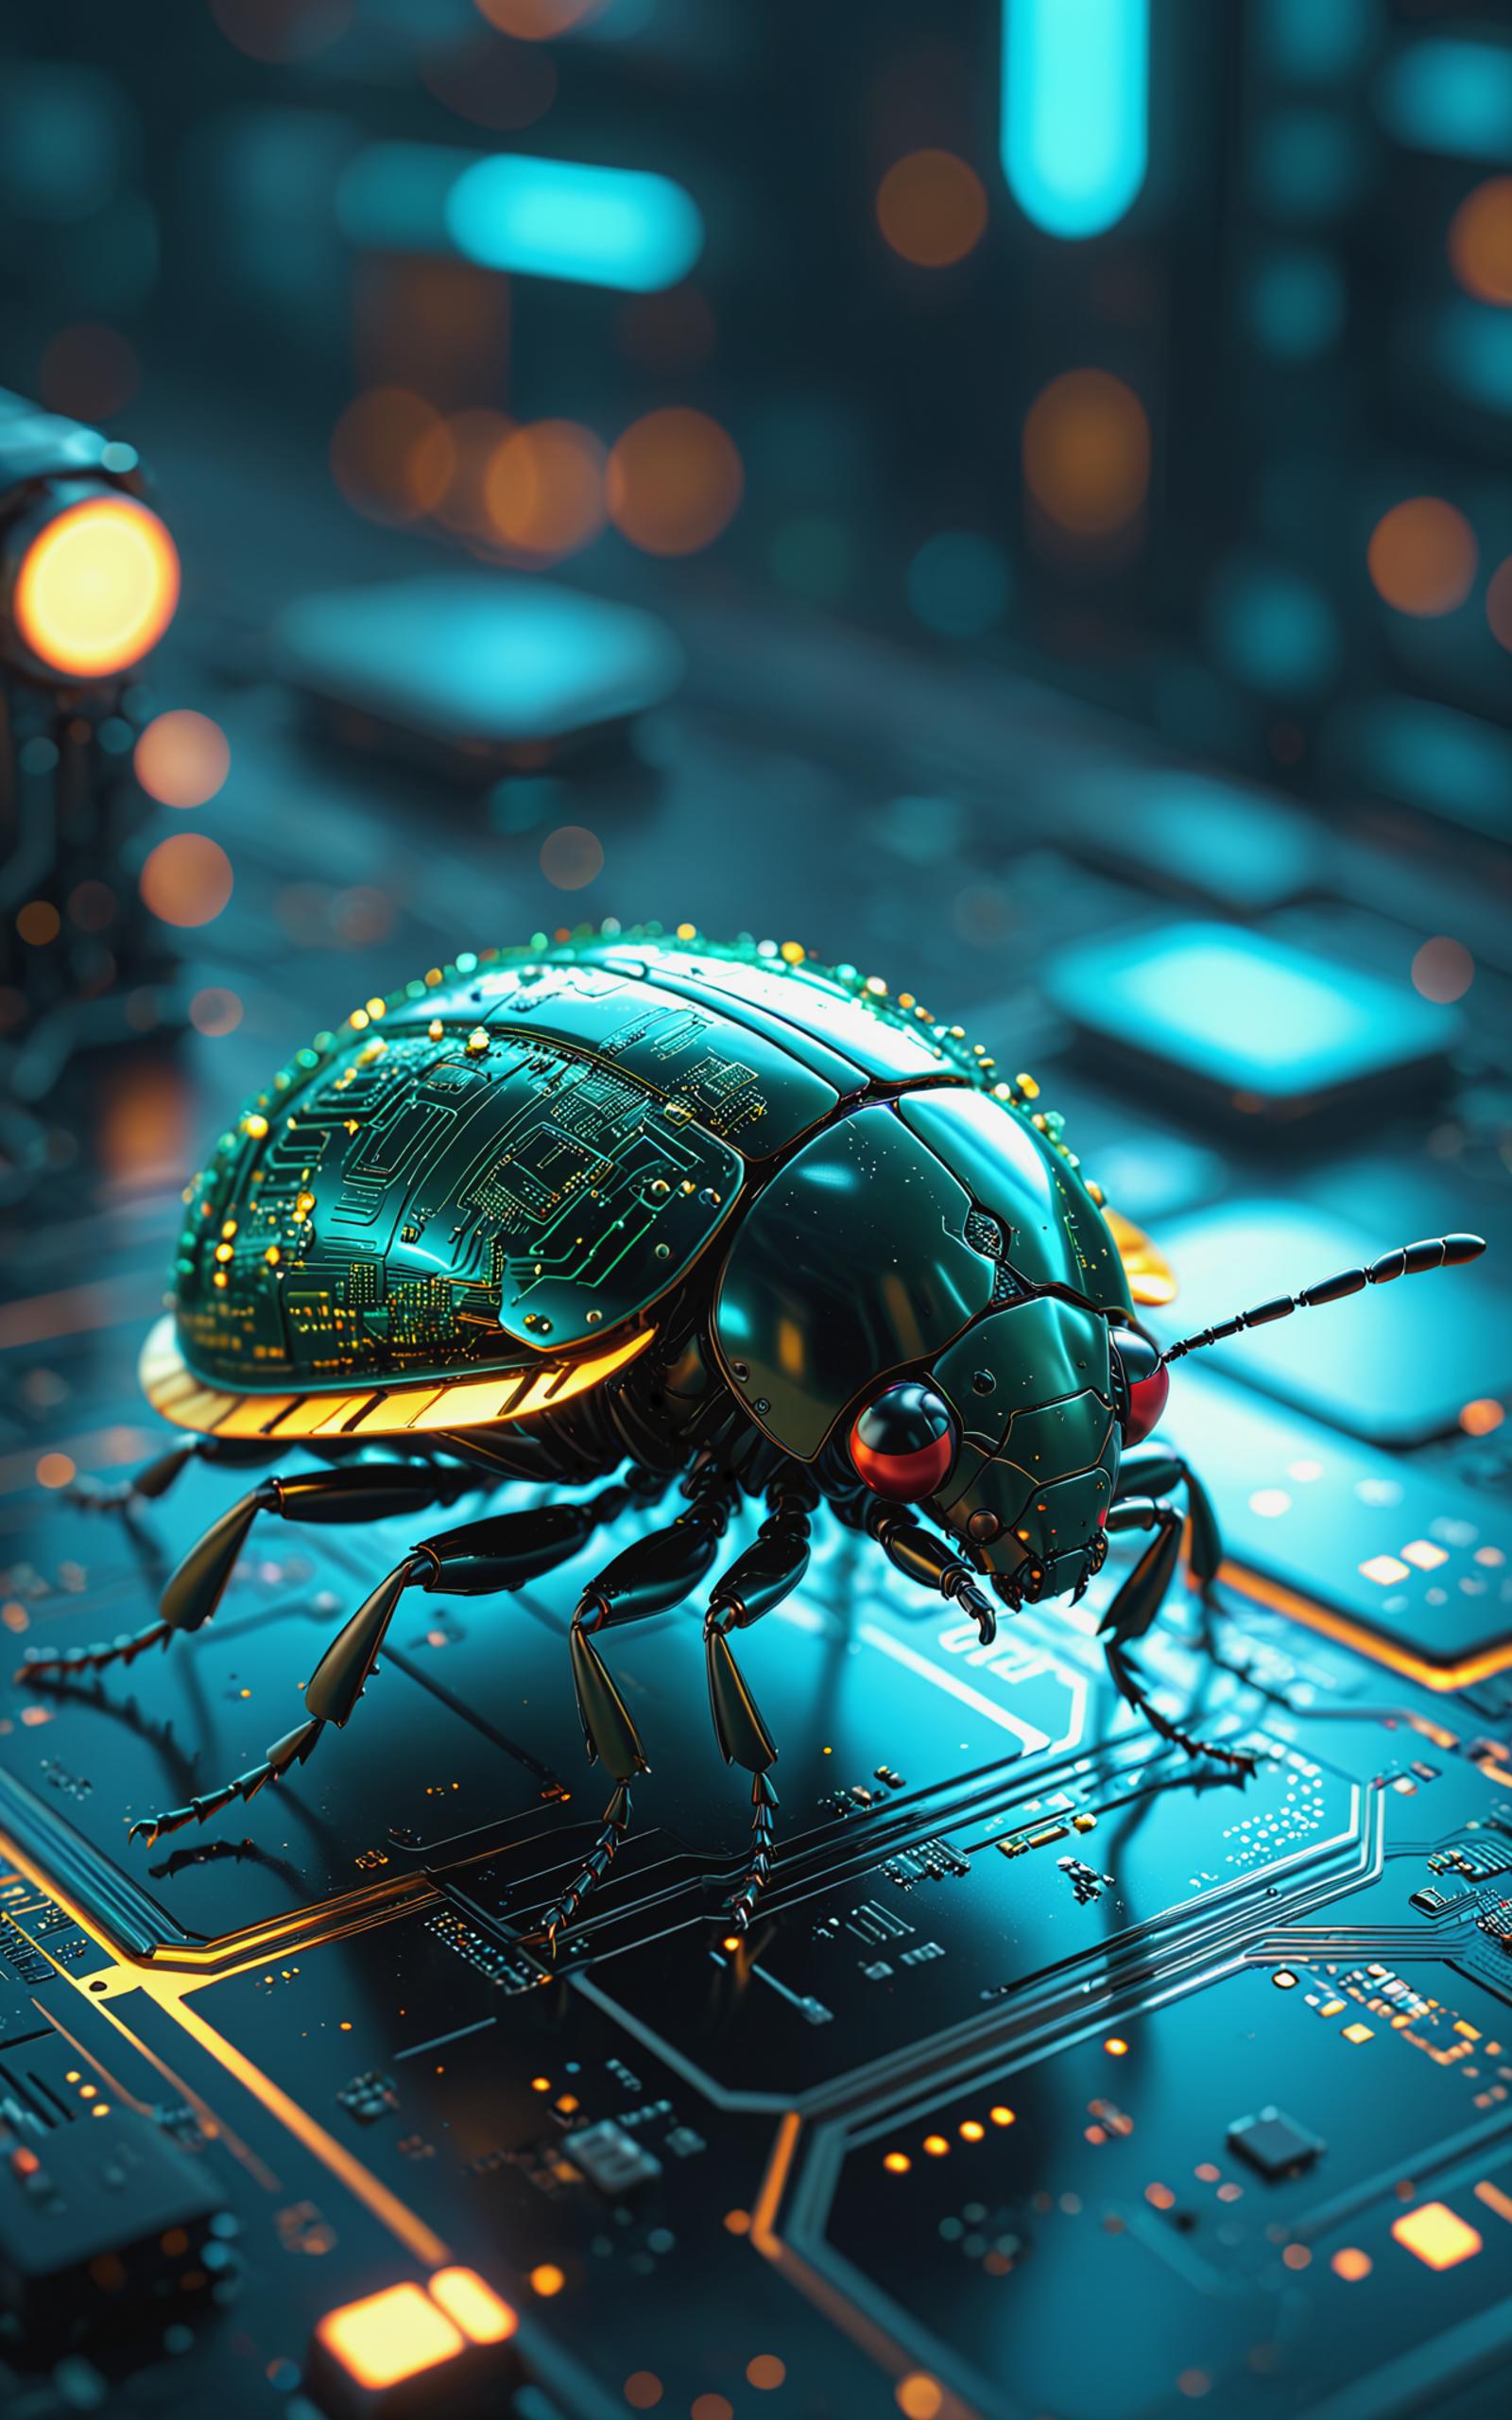 The image features a green and black beetle, possibly a ladybug, sitting on a circuit board. The insect appears to be either walking or crawling on the circuit board, which is covered with yellow and green lights. The beetle's presence adds a unique and interesting visual element to the scene.